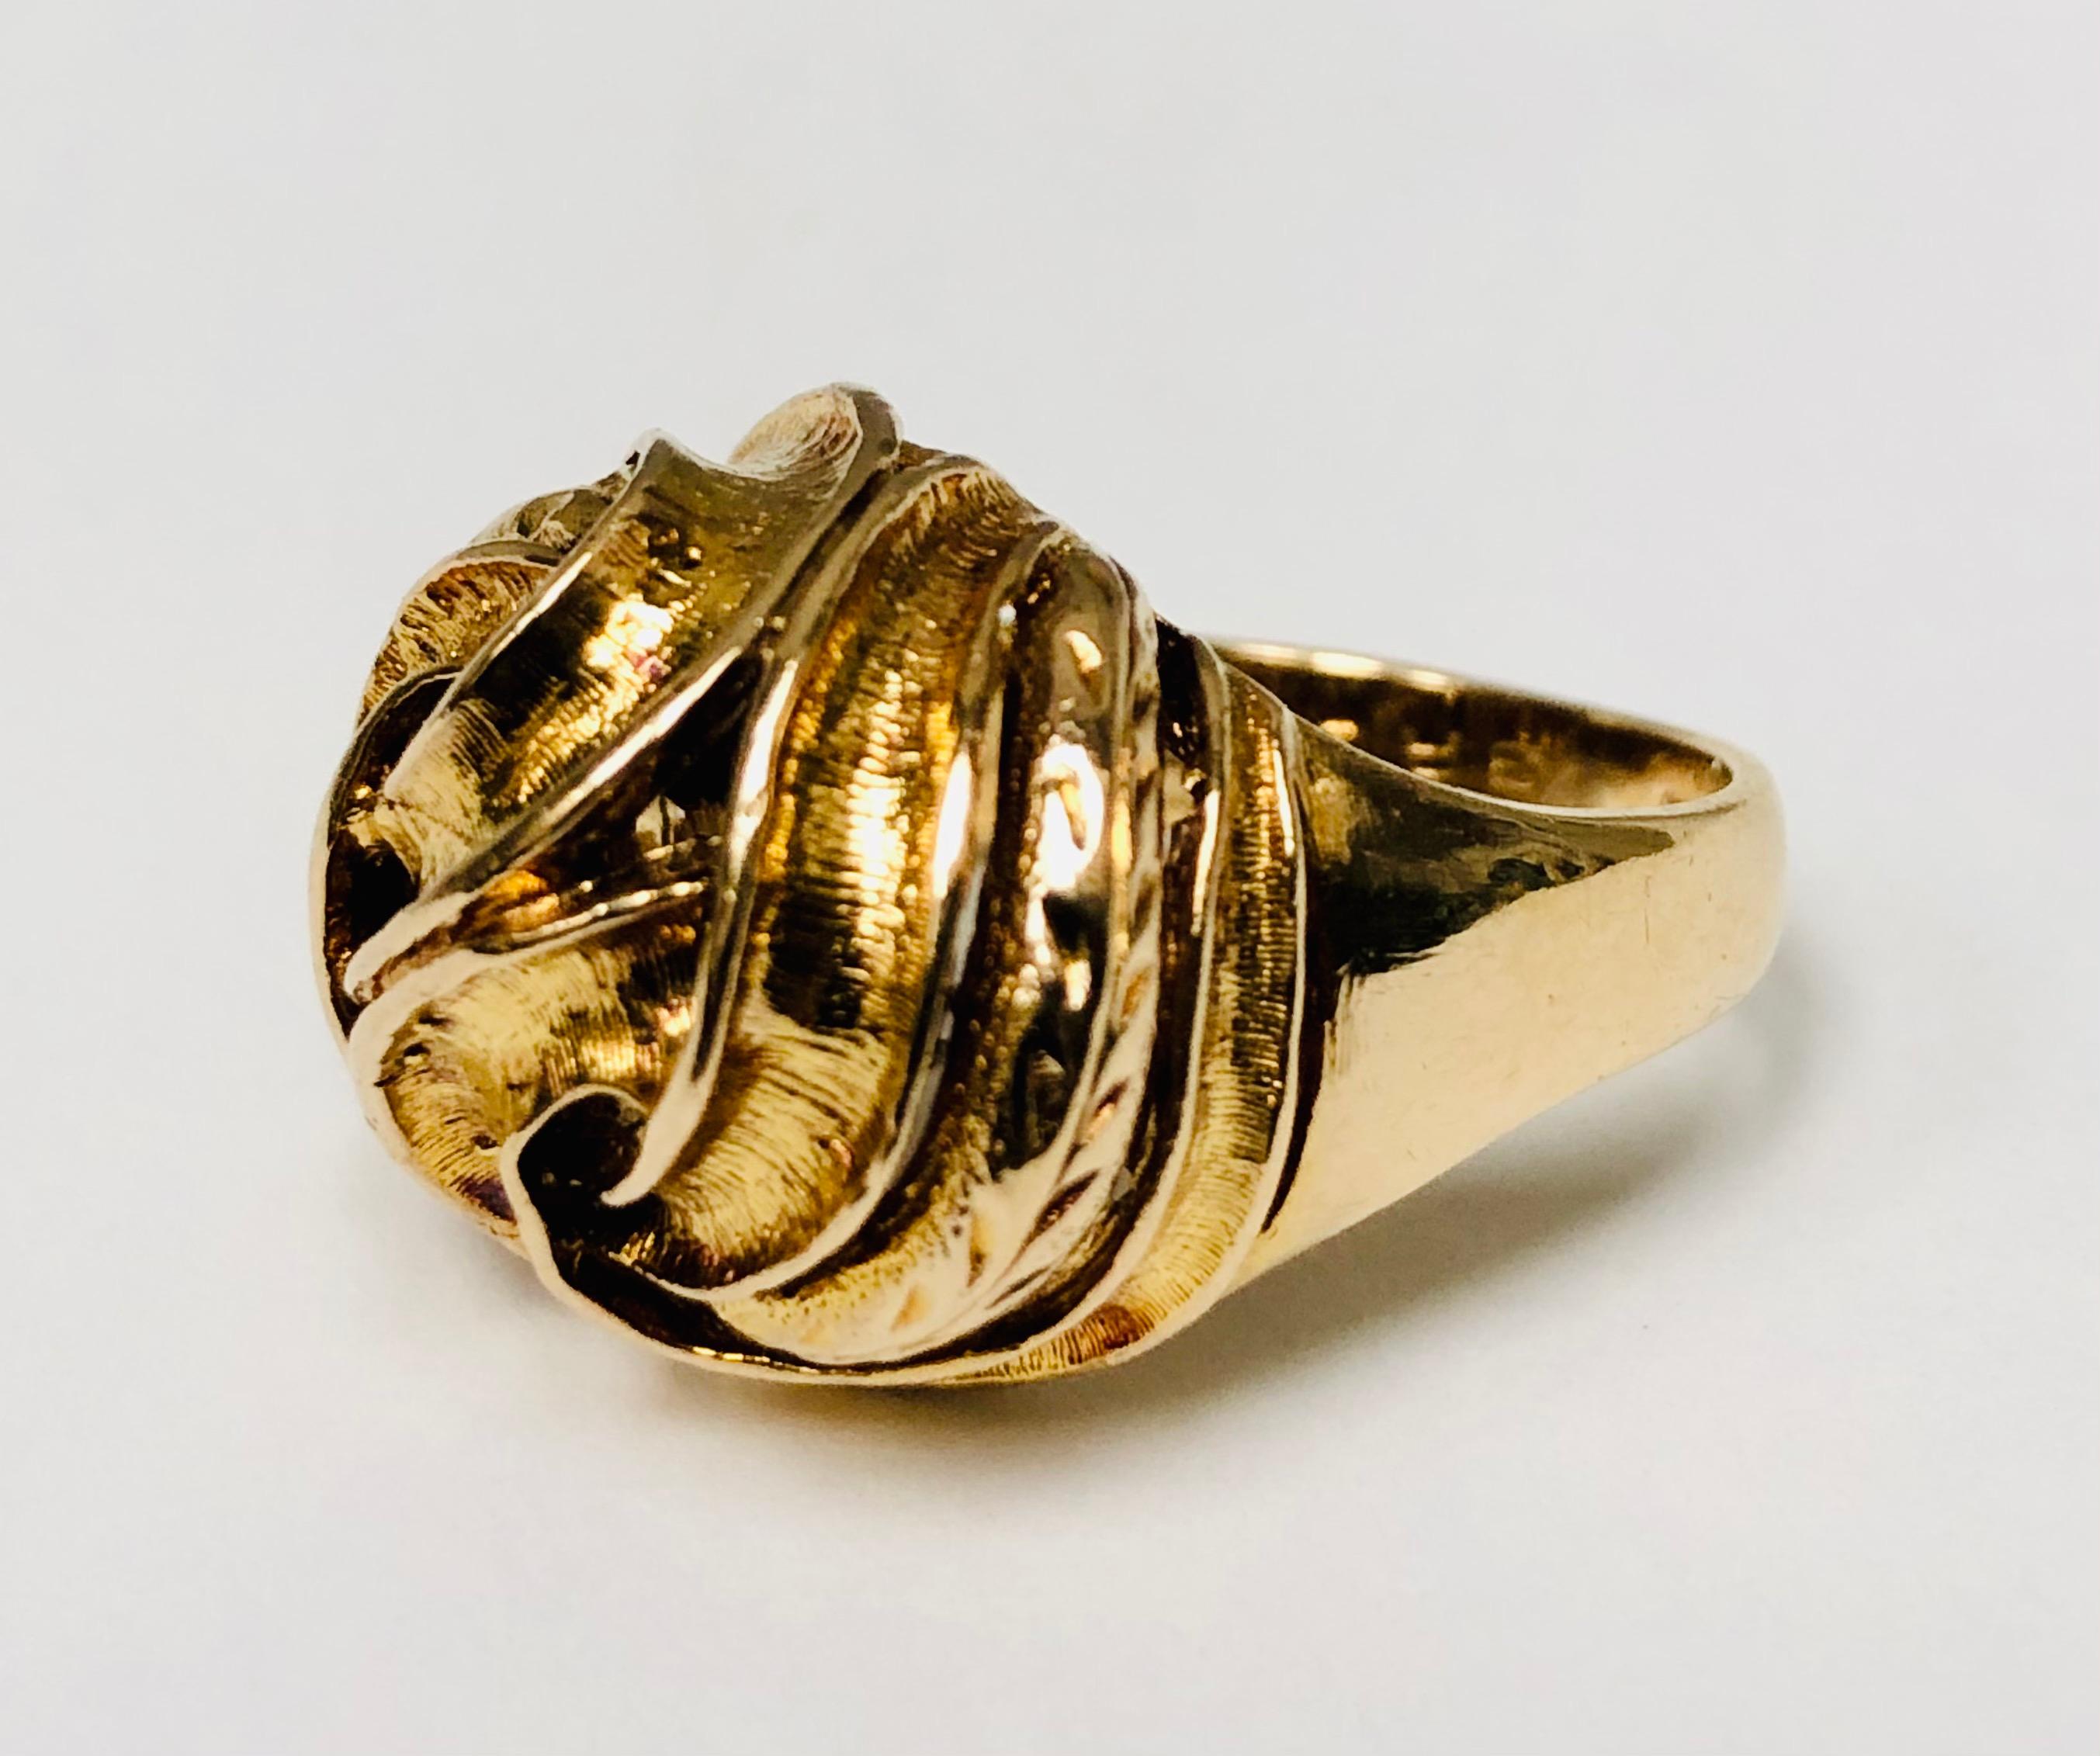 A love knot and gold dome ring in one lovely interwoven vintage jewel. A seamlessly intertwined 1970's, 9 karat gold dome ring made in the United Kingdom circa 1972. Ring size 6. Makers mark ML. Anchor stamp for Birmingham, England. 

Height 1.1 cm